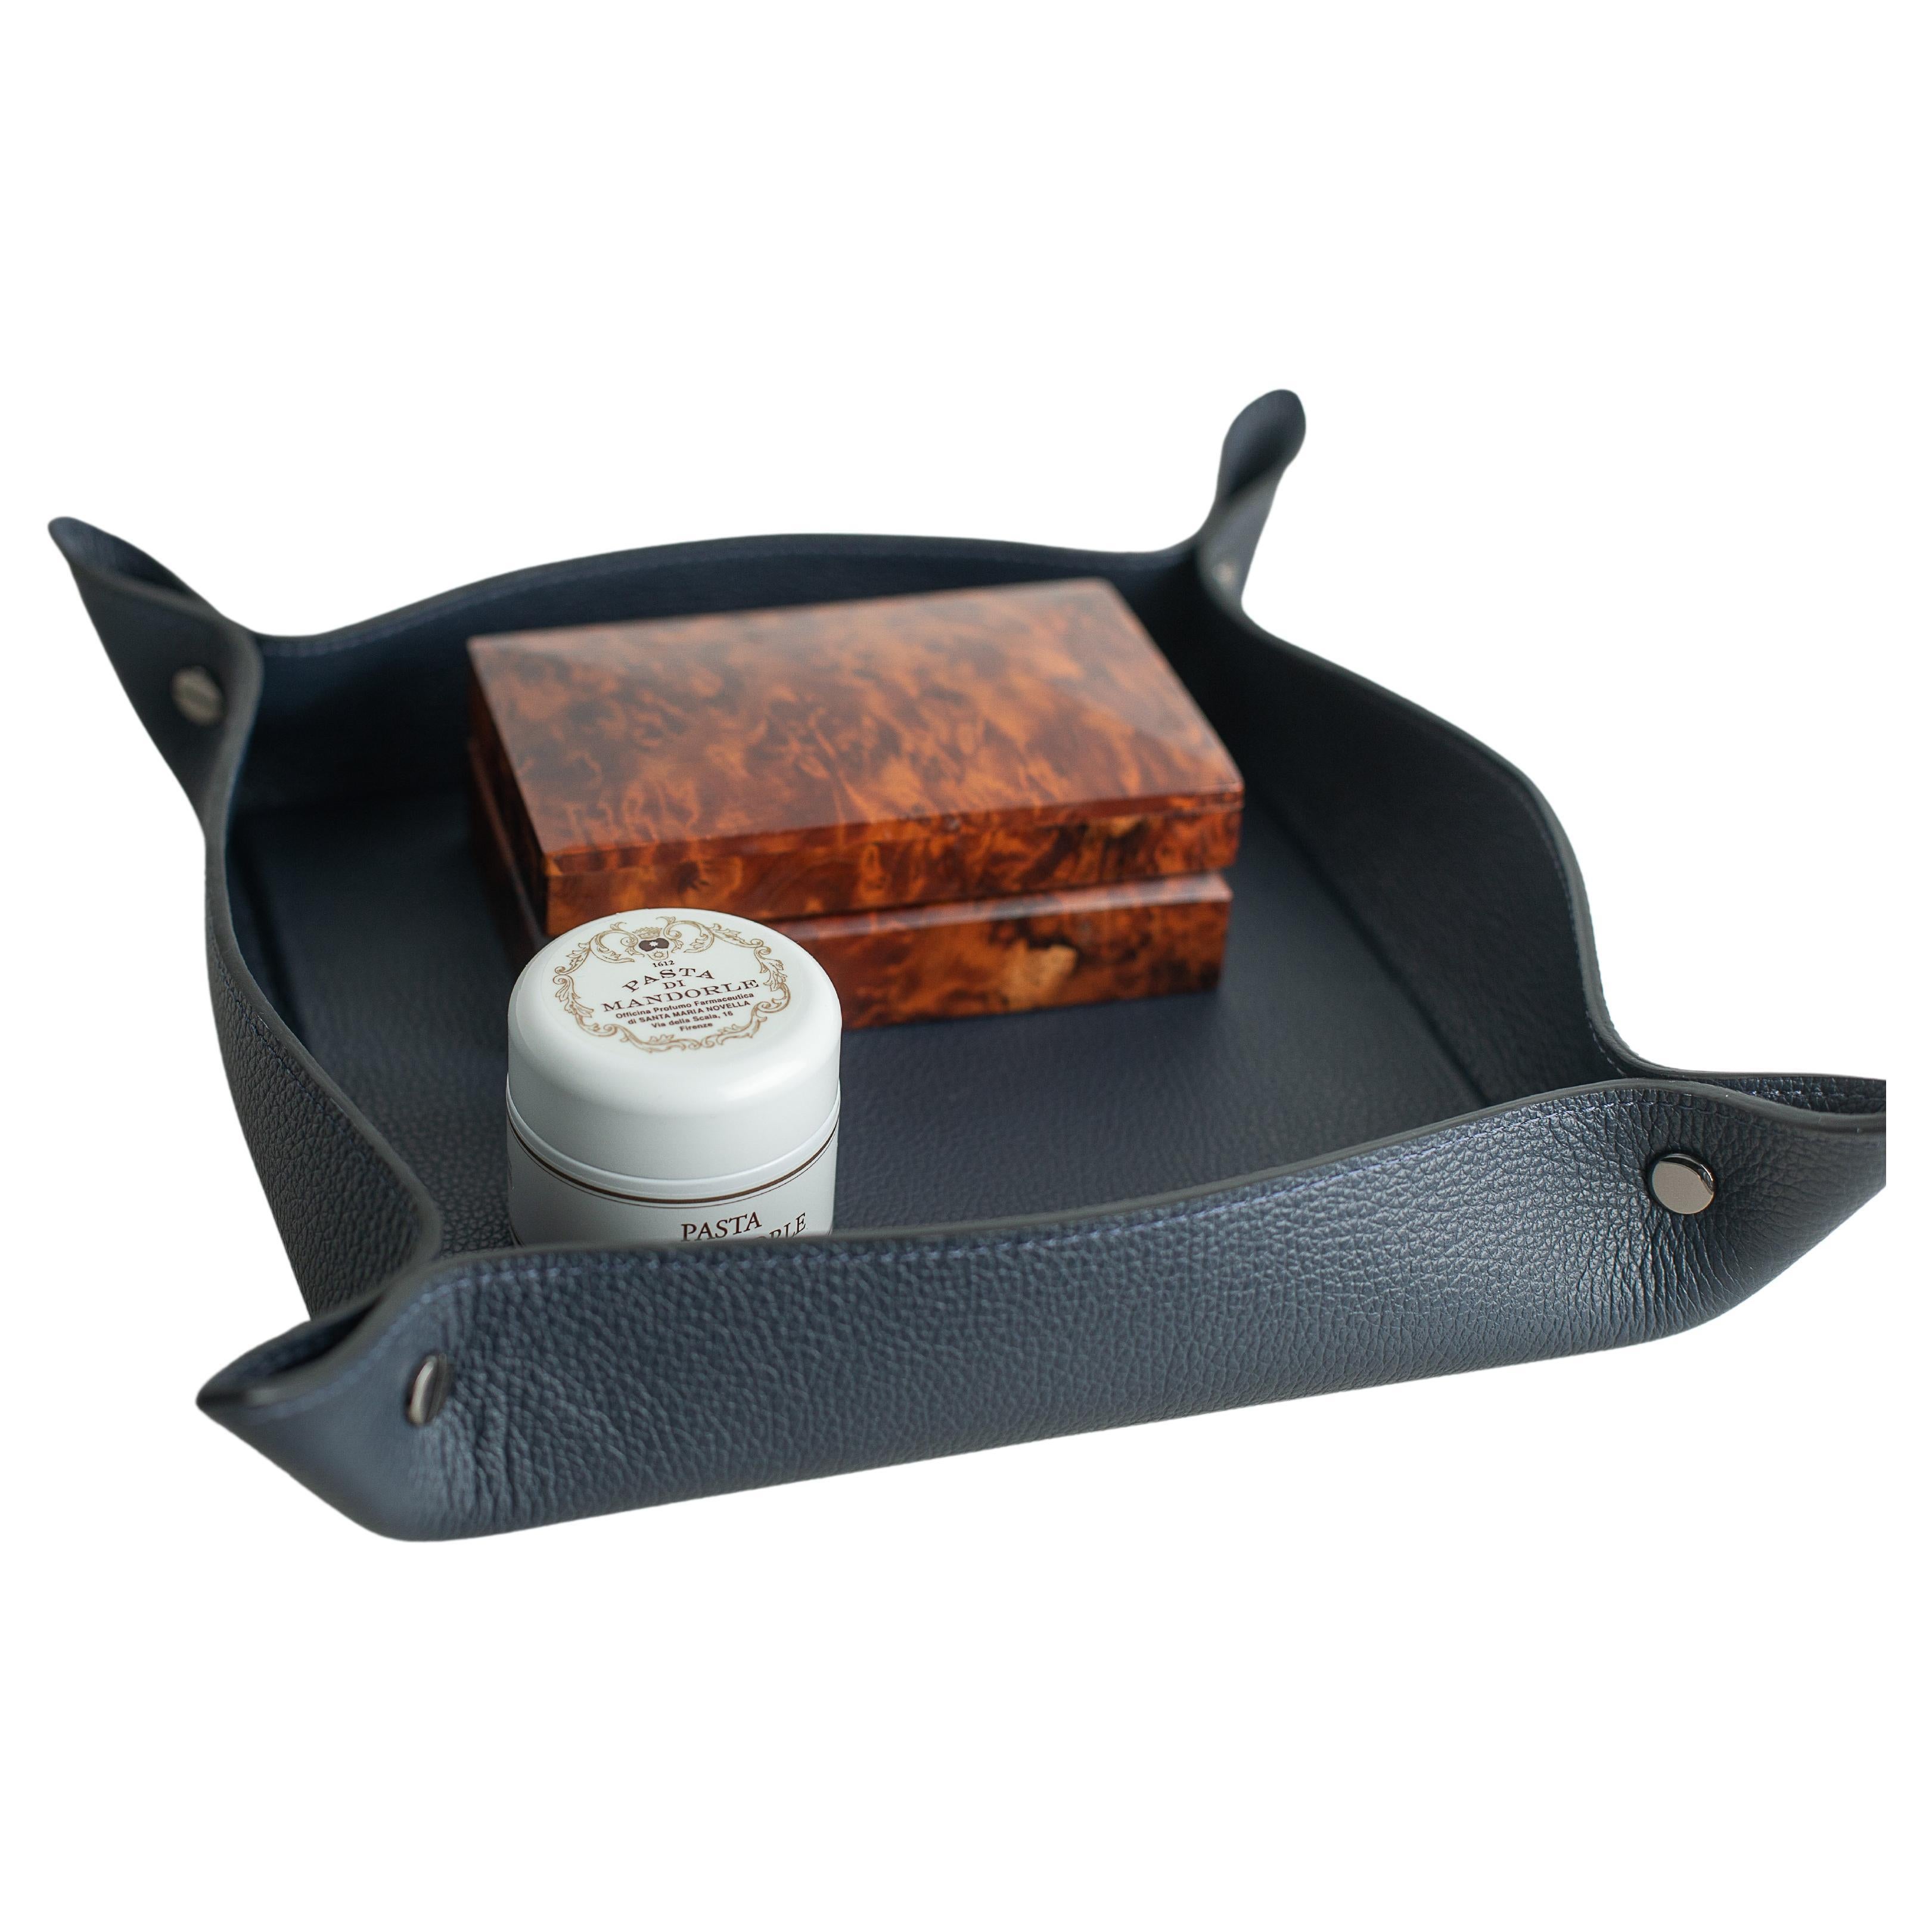 OBJECT HOLDER

The Trinket Tray/Object Holder Line can be used as organizers for everyday objects or as your imagination suggests.

Made of genuine leather, the Italian border finish and the side chrome metal add a unique refinement to the